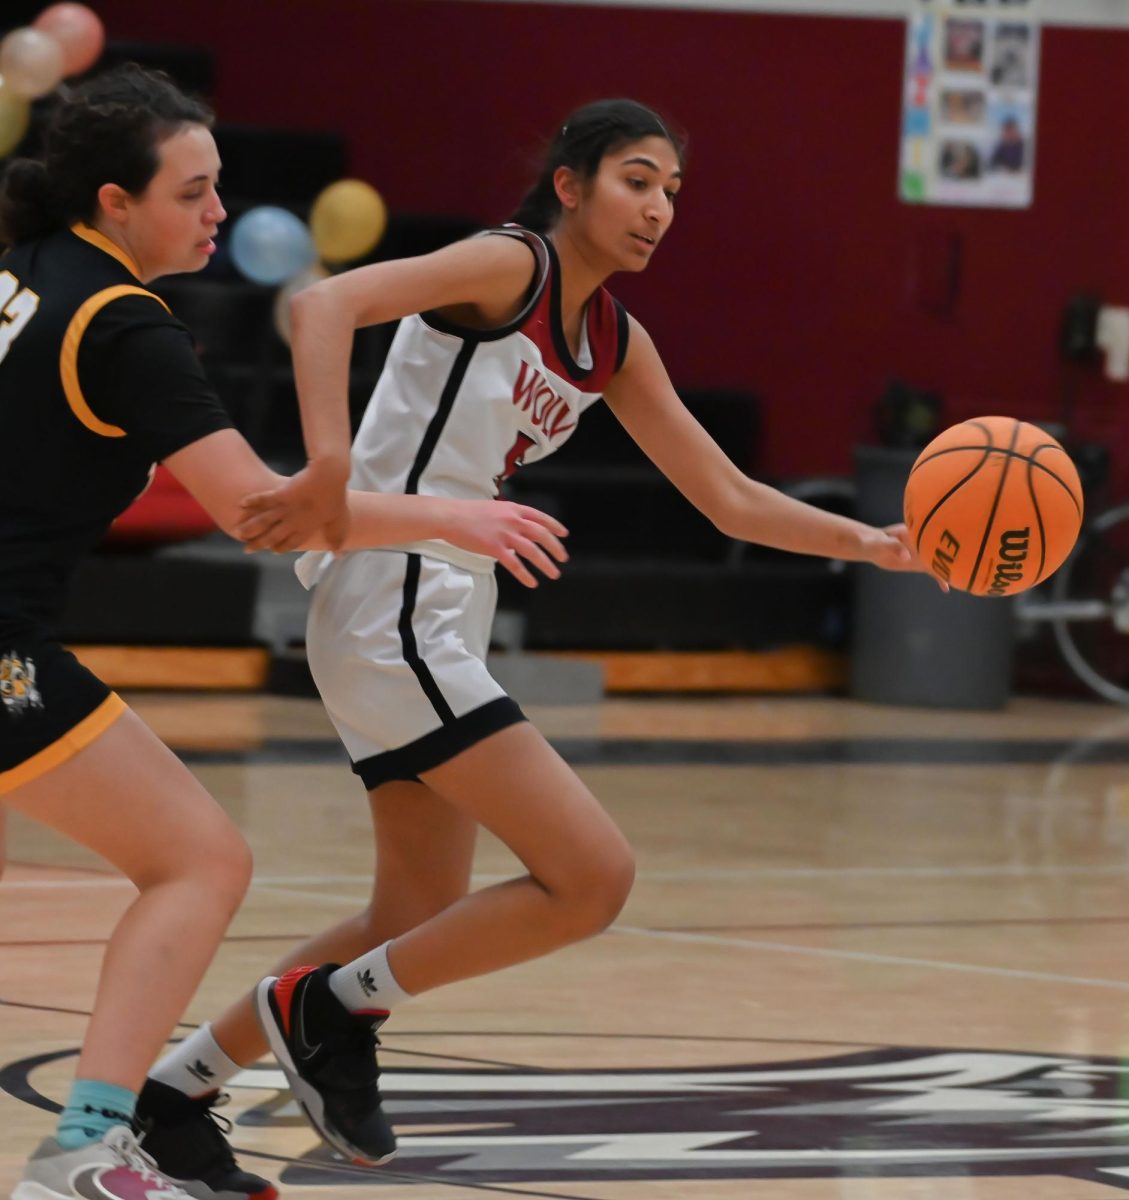 Junior, Karen Grewal successfully gets passed her defender as she runs to score a layup. 